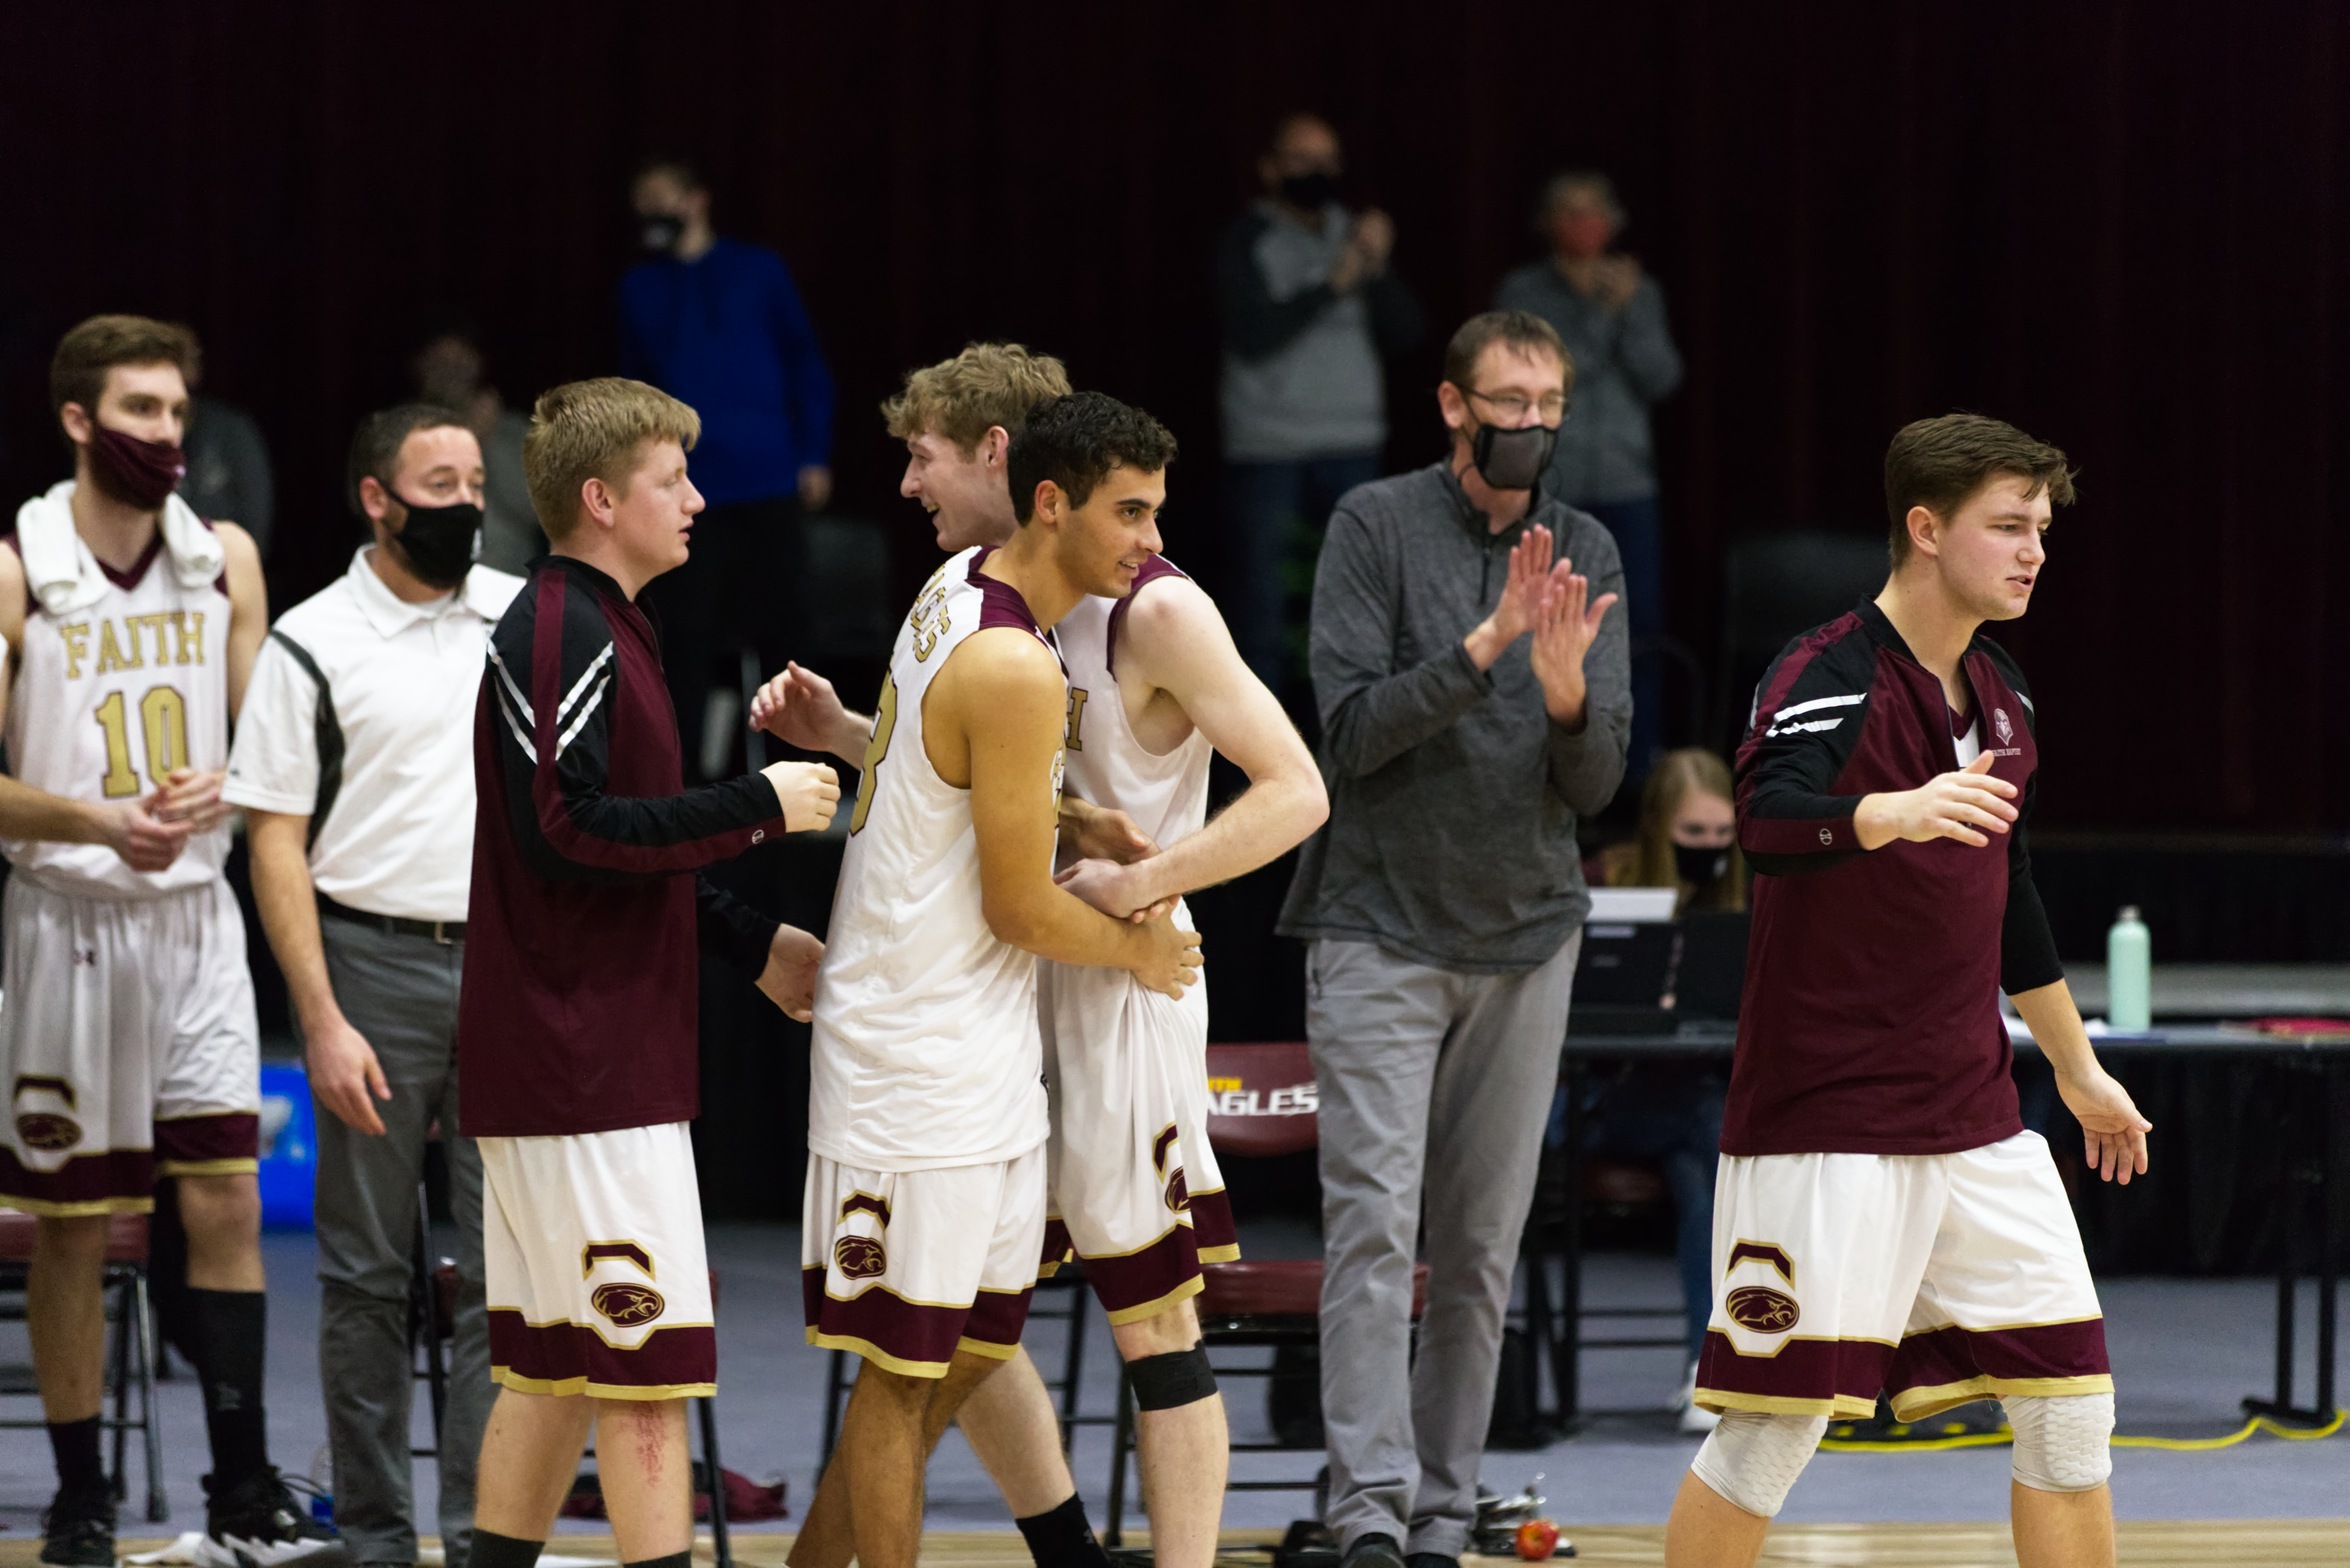 Eagles celebrate win over #2 Barclay (Photo by David Farlow)